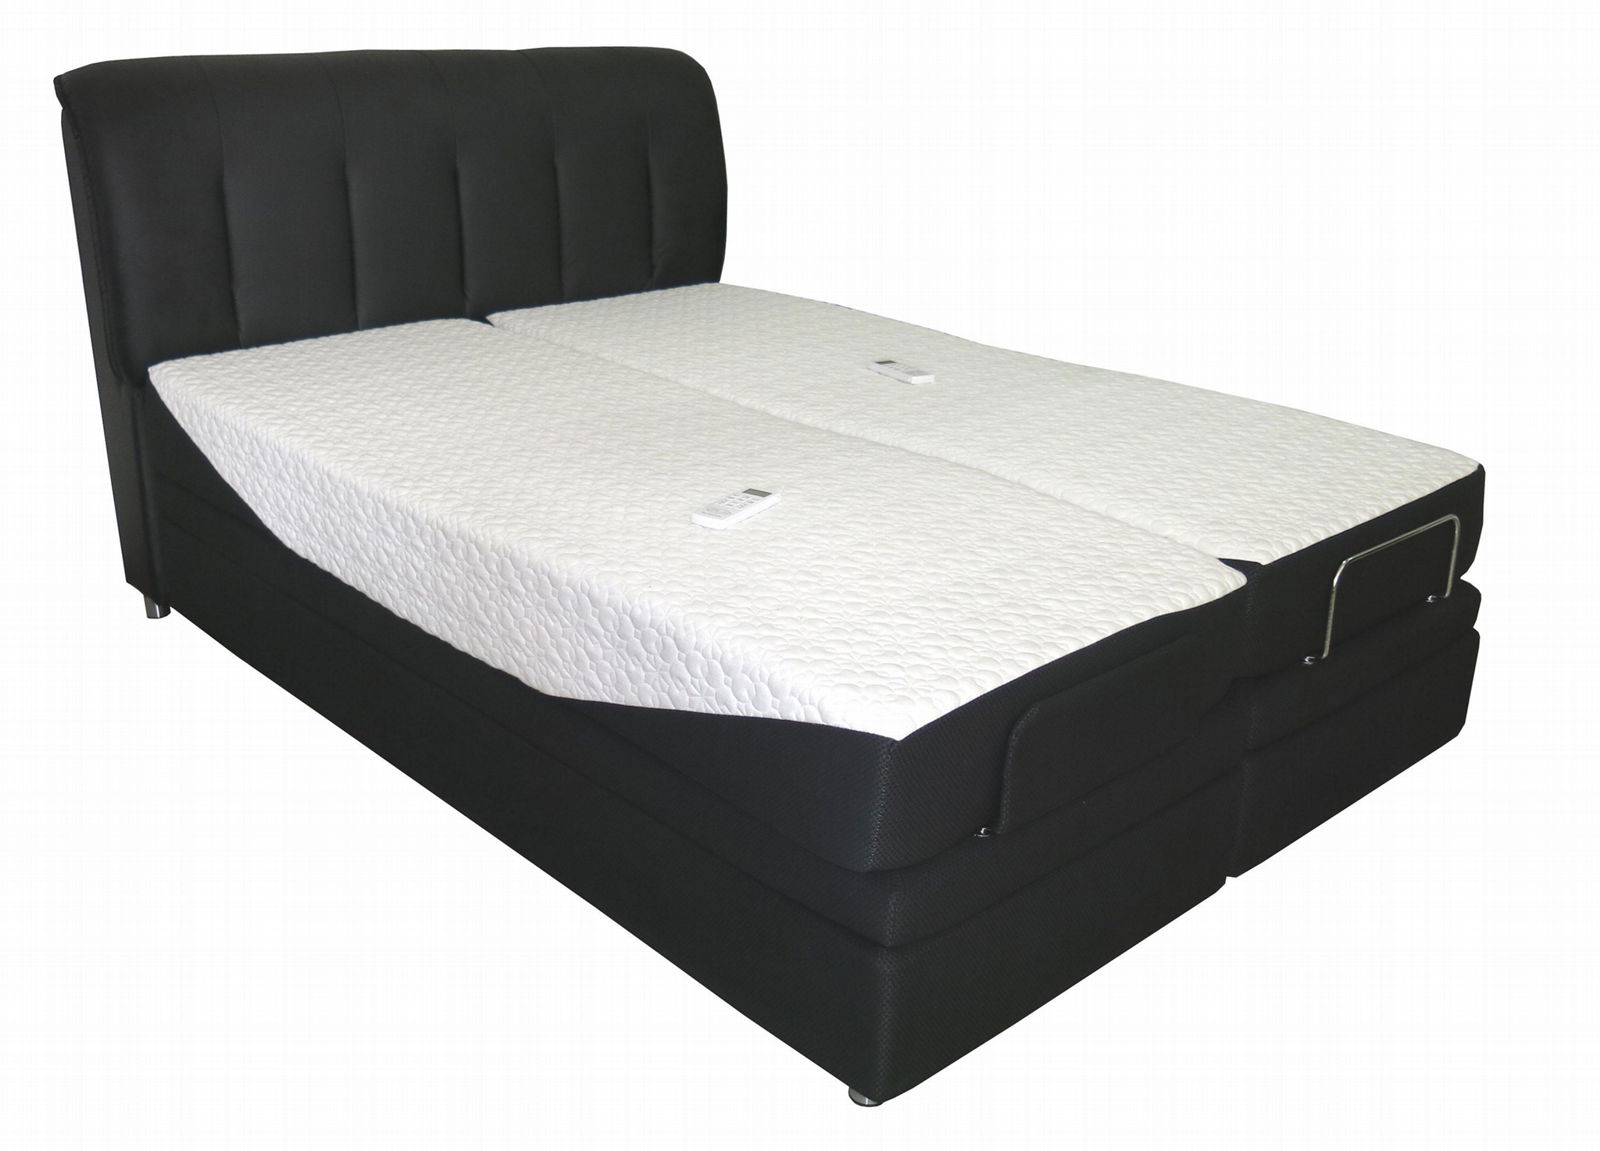 Twin adjustable bed and mattress set 5